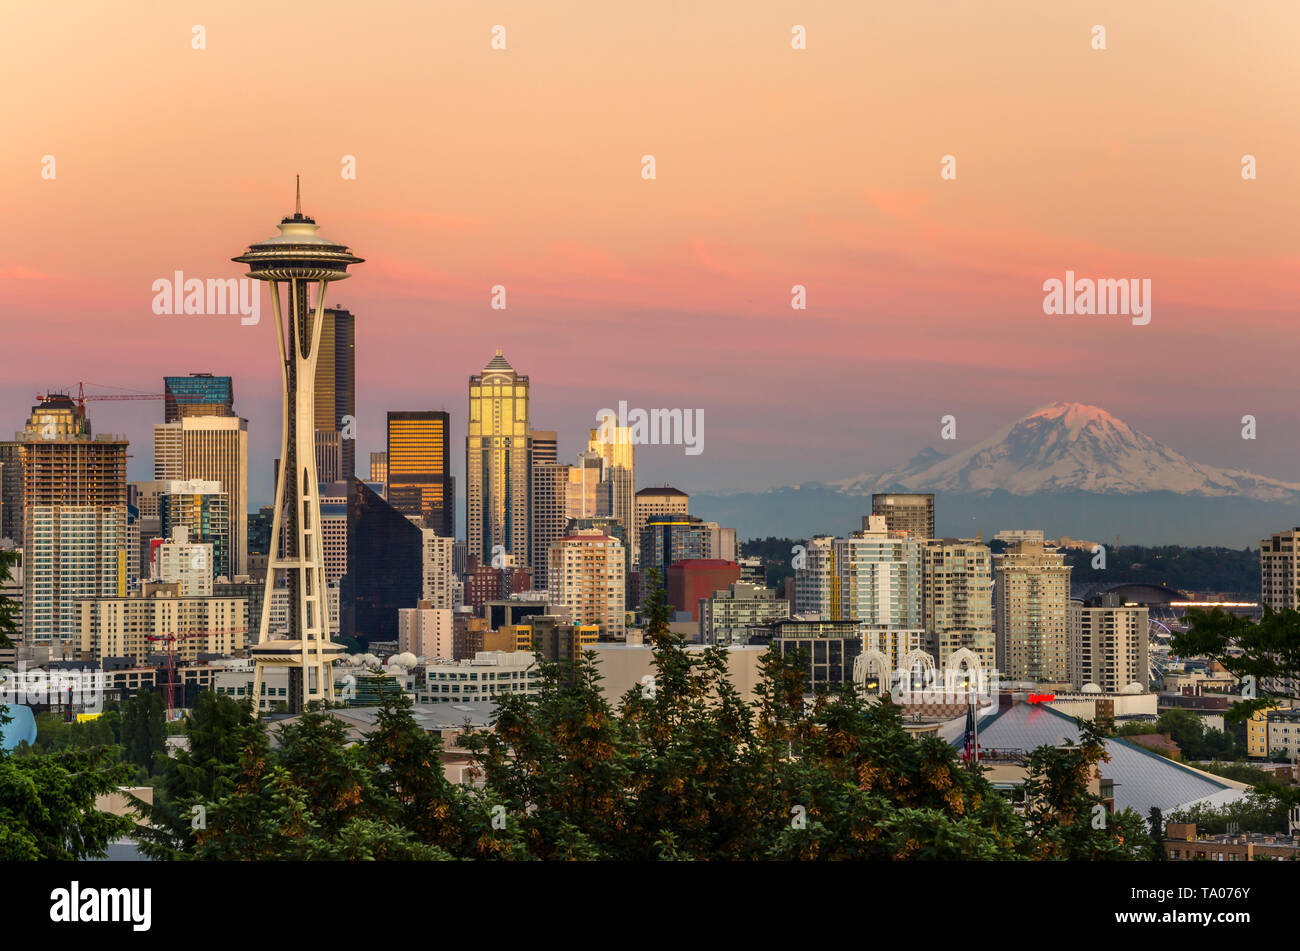 Majestic view of Seattle skyline vith a Snow-capped Mount Rainier in Background at Sunset Stock Photo